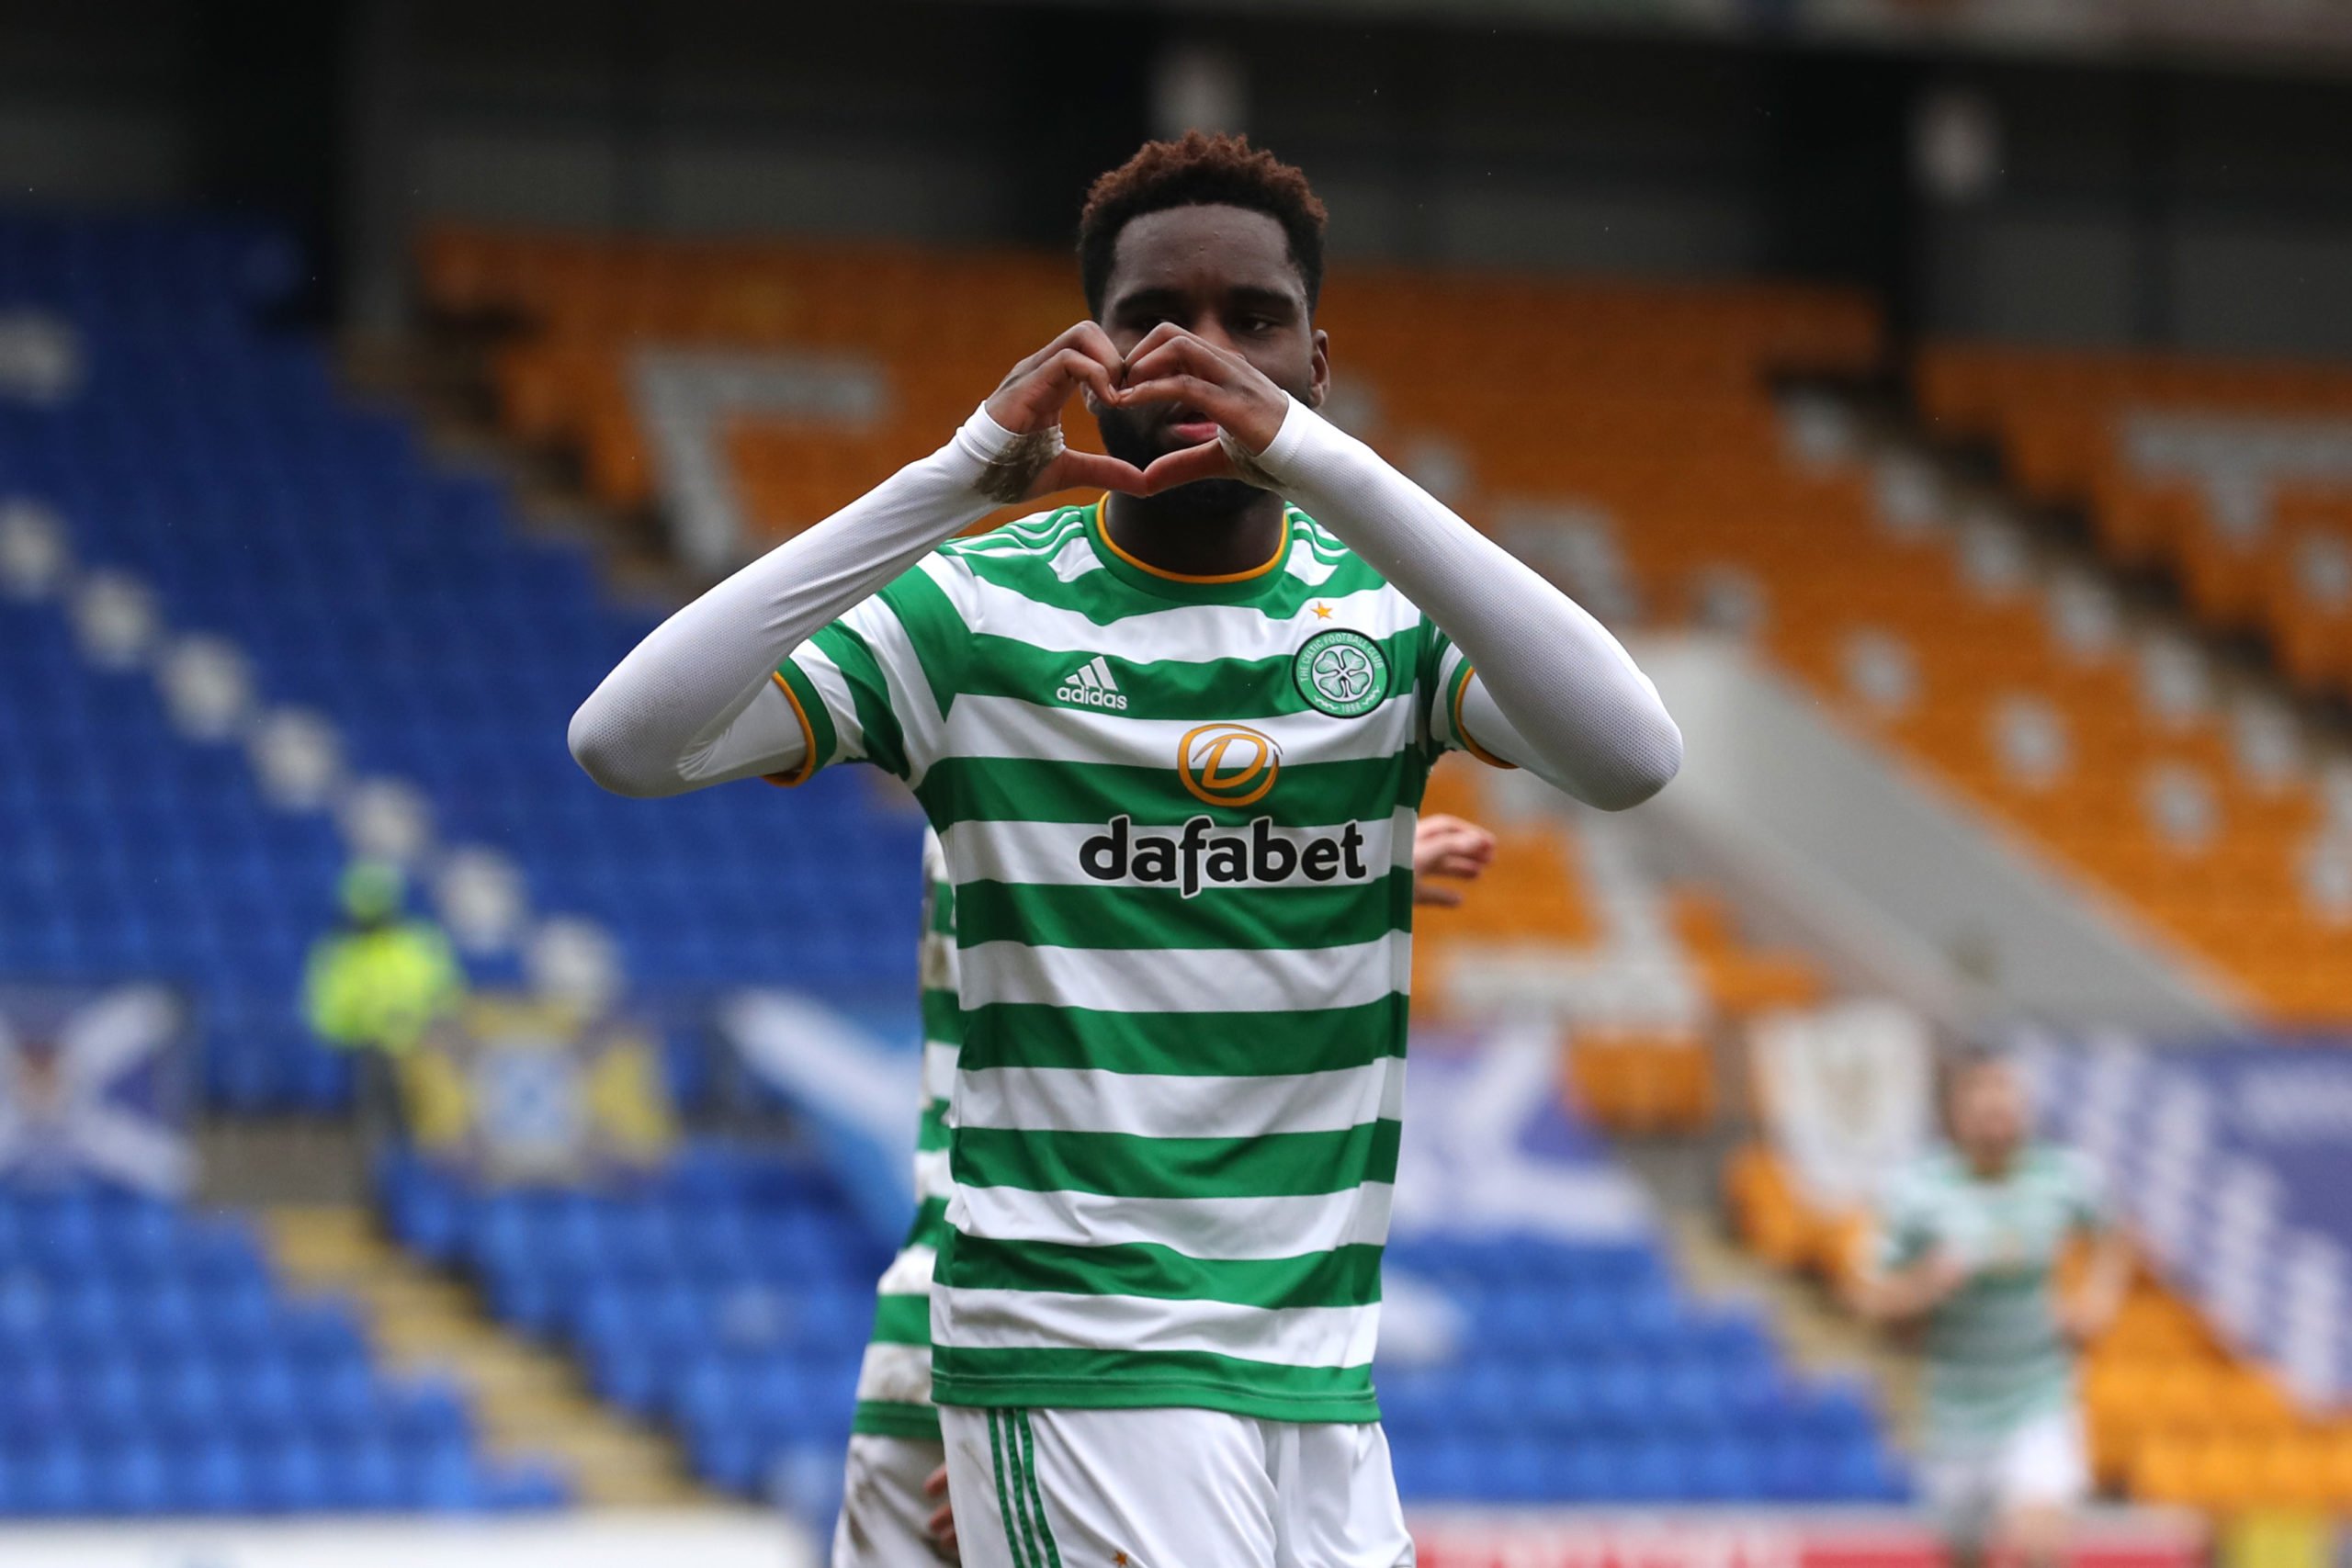 Report: Celtic star Odsonne Edouard close to potential £20m Leicester City move